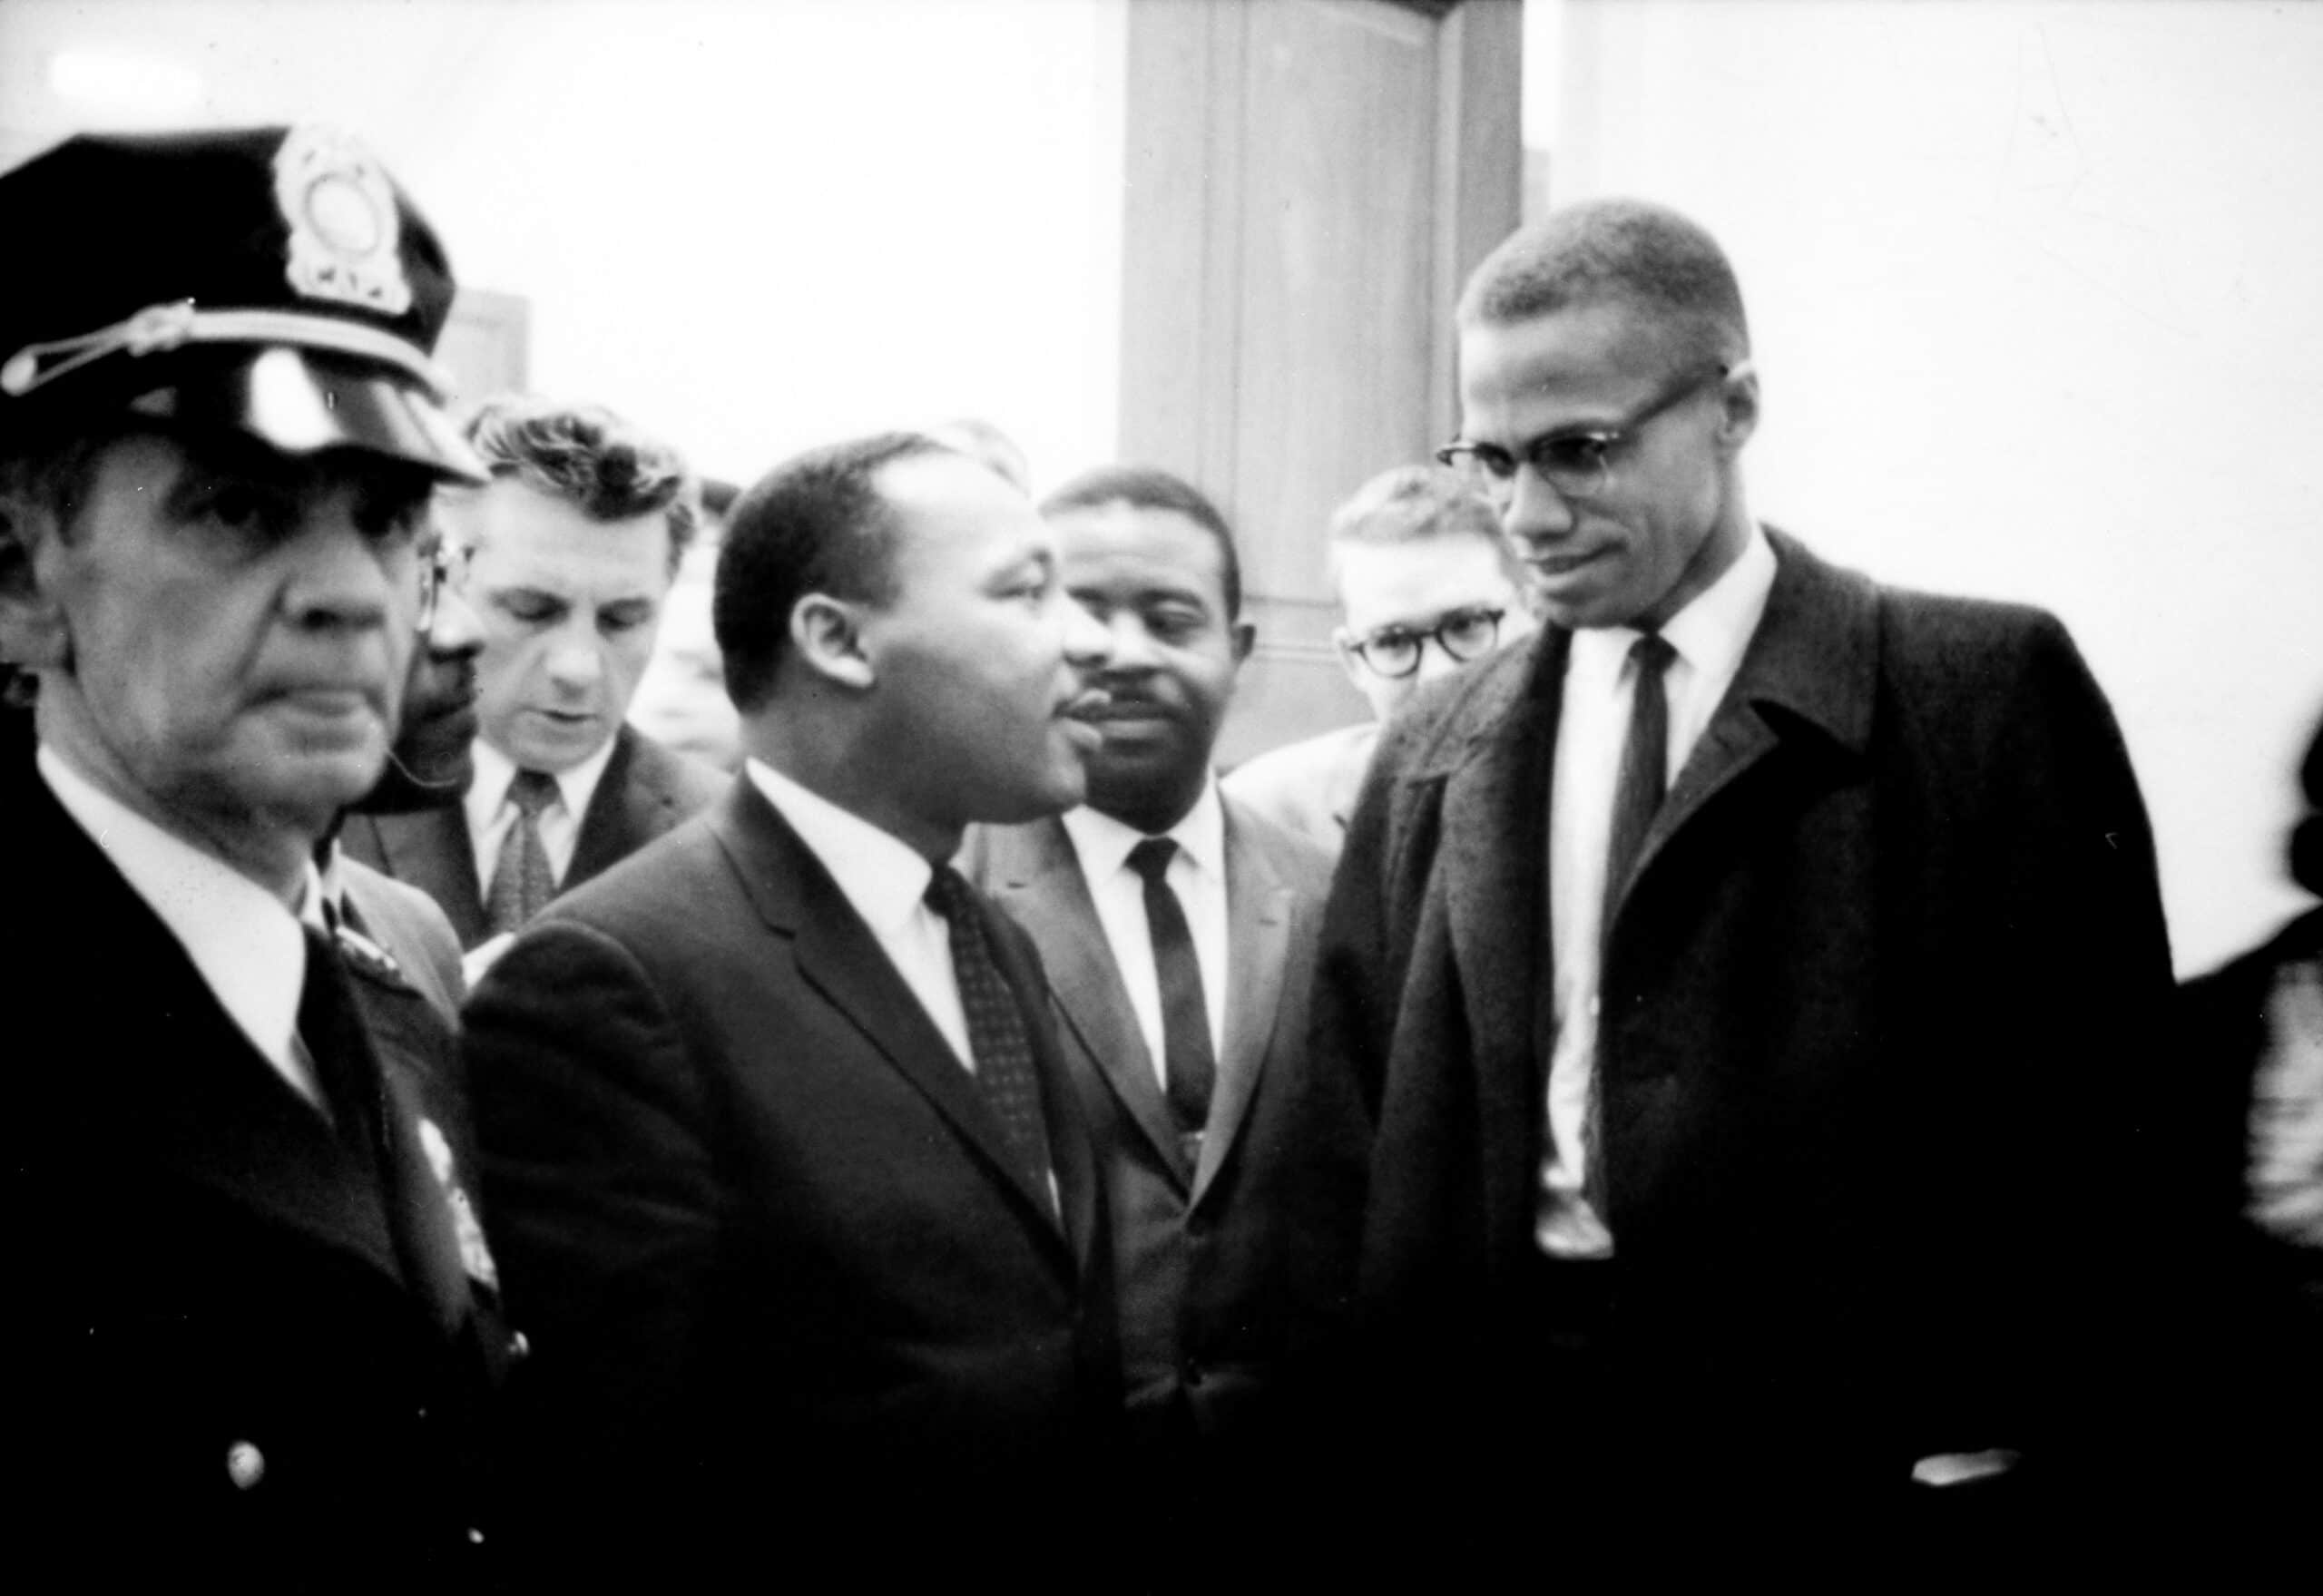 Martin Luther King, Jr. and Malcolm X meet before a press conference. Both men had come to hear the Senate debate on the Civil Rights Act of 1964. This was the only time the two men ever met; their meeting lasted only one minute.26 March 1964. Photo: Staff photographers of U.S. News & World Report. Collection: The Library of Congress, Washington D.C. No known copyright restrictions.